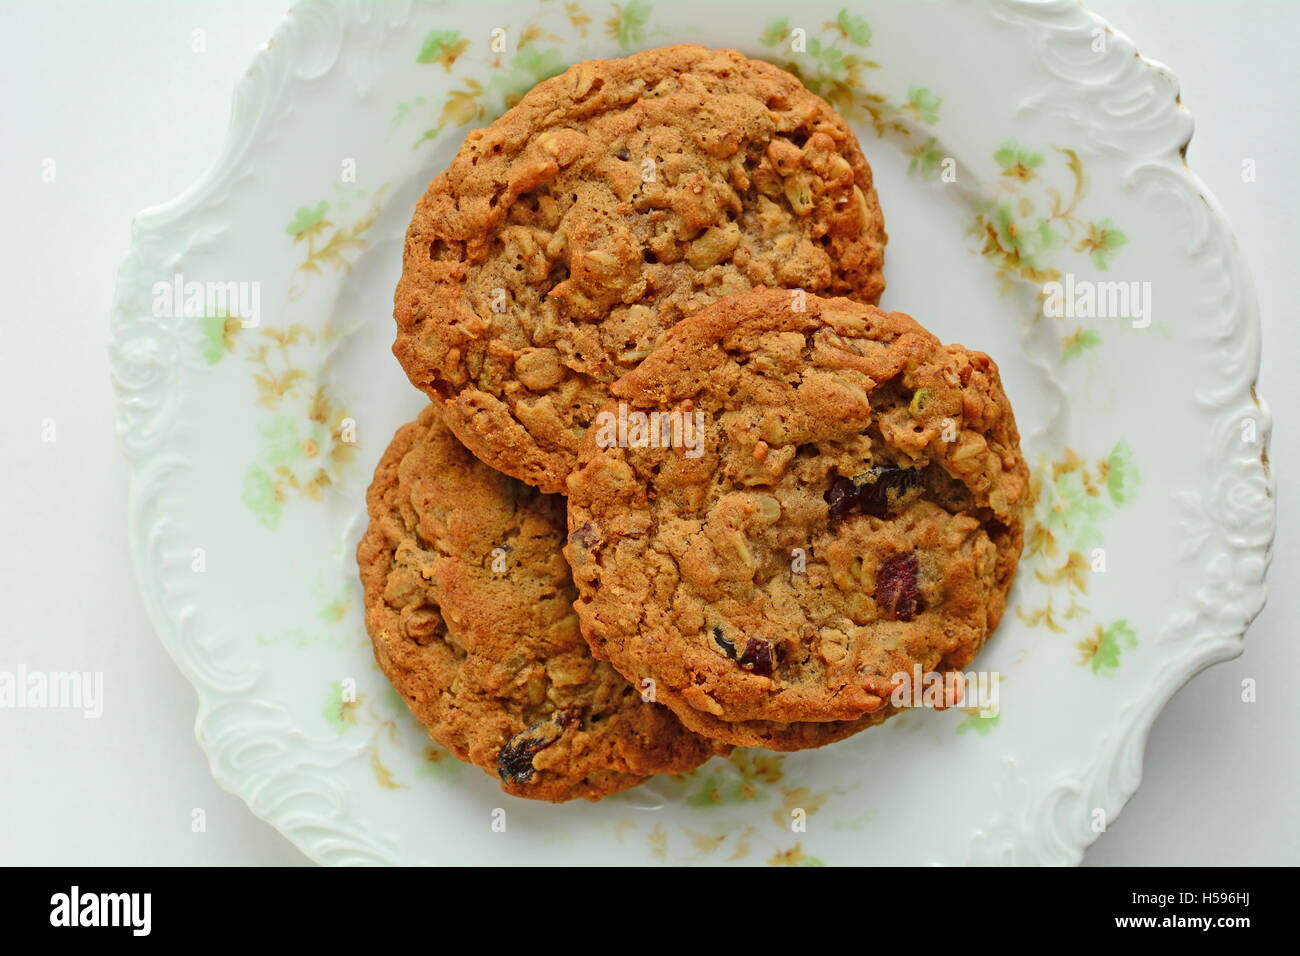 Fresh baked oatmeal raisin walnut cookies on pretty vintage plate from overhead in horizontal format Stock Photo